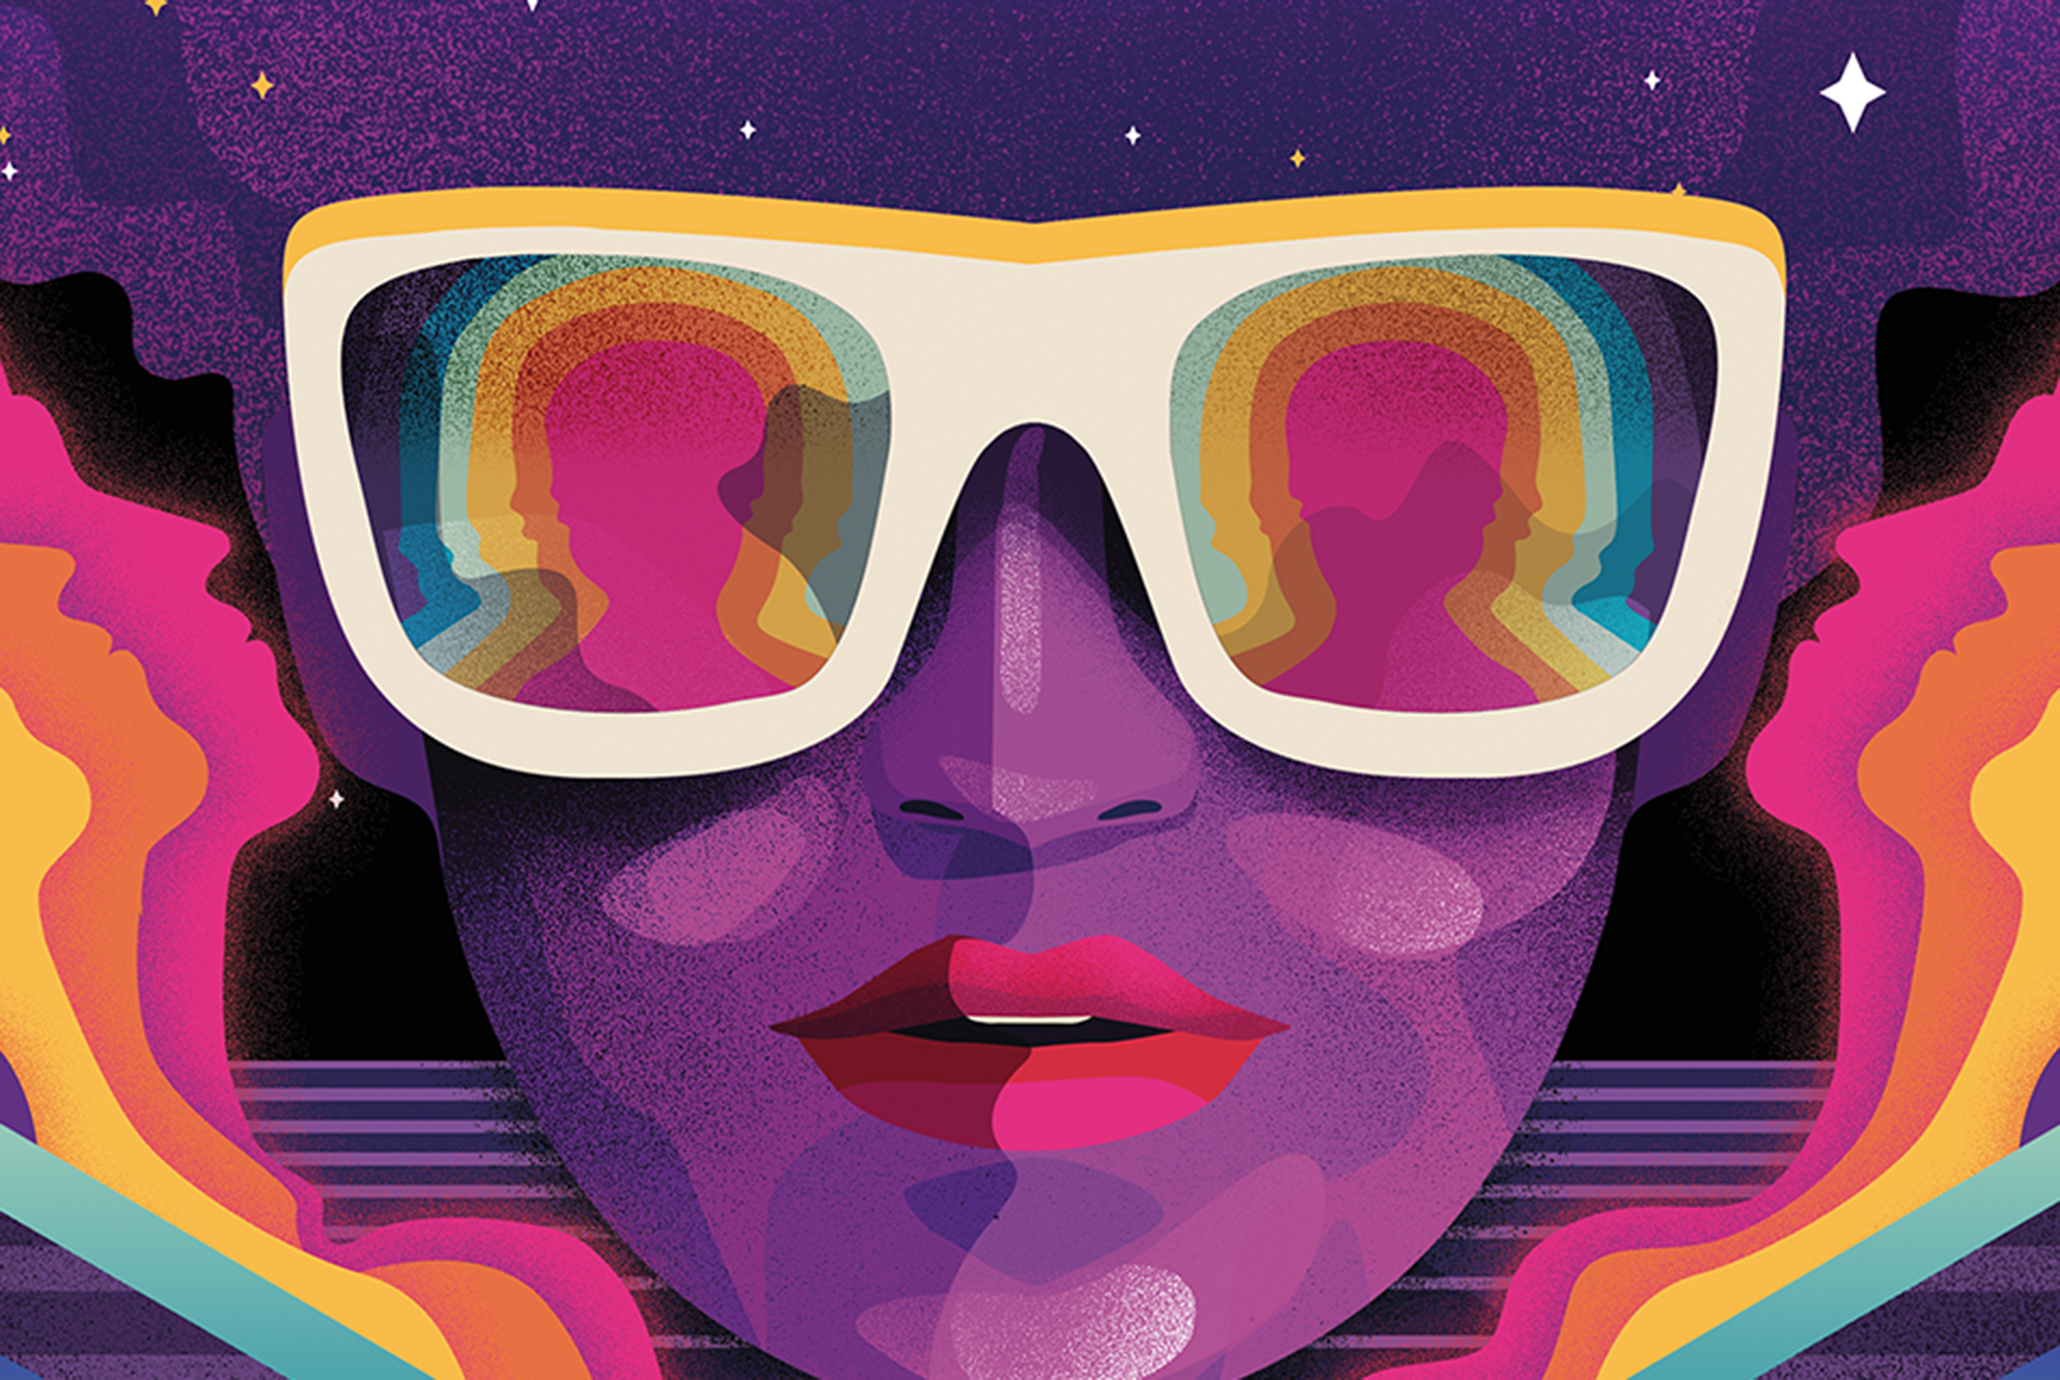 Key art for the cover of Dream Crush, a new dating game from Mondo Games, shows a 1980s inspired image of a woman wearing sunglasses.